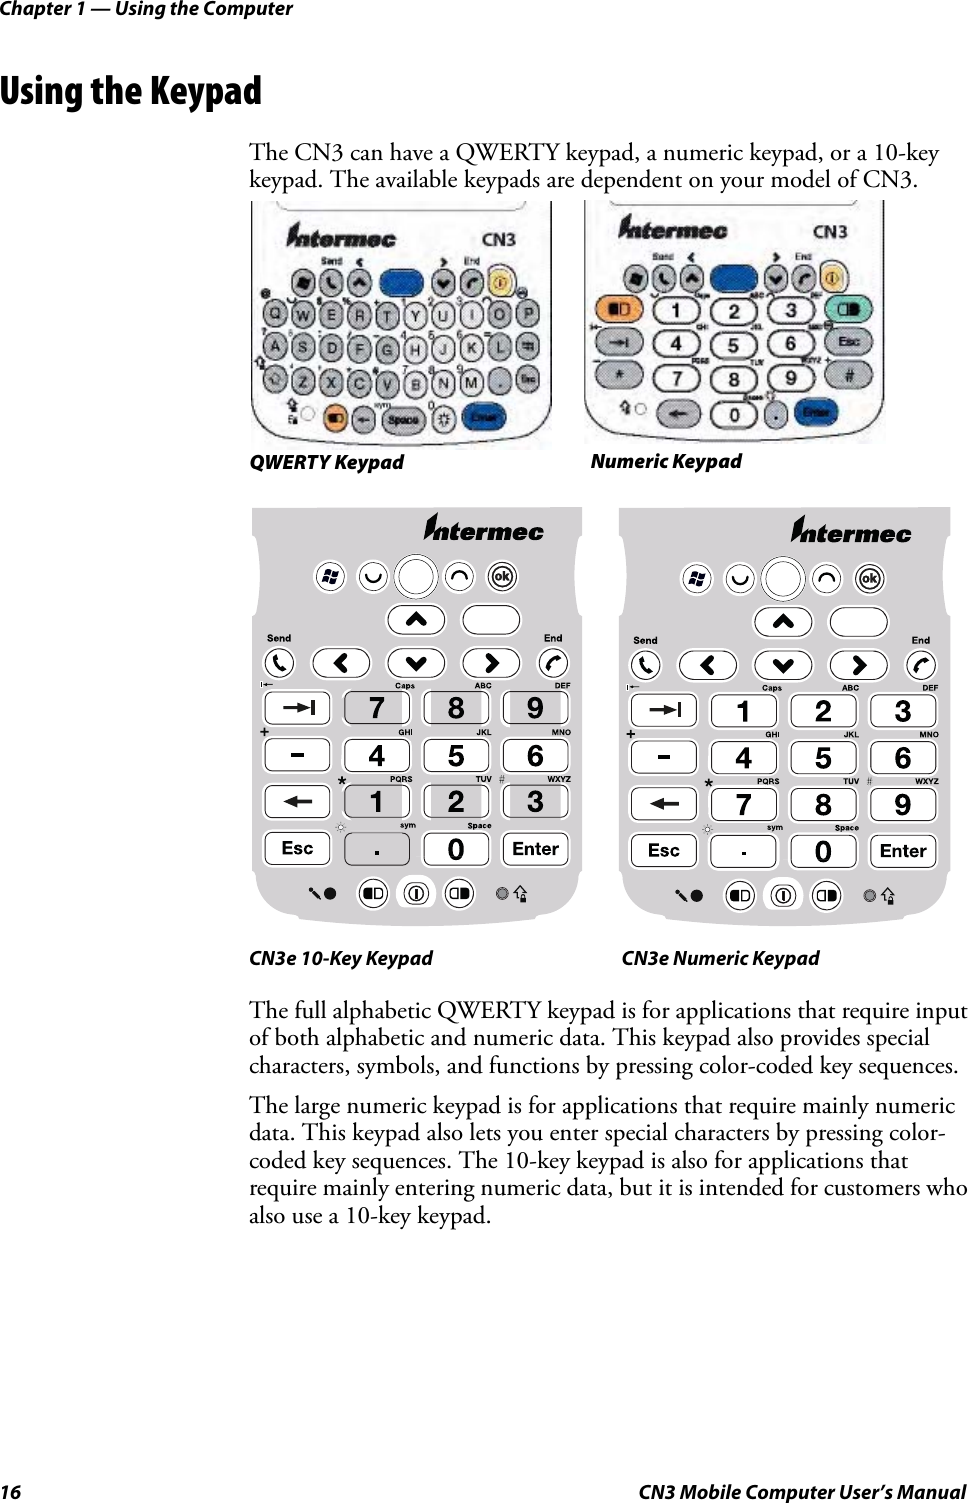 Chapter 1 — Using the Computer16 CN3 Mobile Computer User’s ManualUsing the KeypadThe CN3 can have a QWERTY keypad, a numeric keypad, or a 10-key keypad. The available keypads are dependent on your model of CN3. CN3e 10-Key Keypad CN3e Numeric KeypadThe full alphabetic QWERTY keypad is for applications that require input of both alphabetic and numeric data. This keypad also provides special characters, symbols, and functions by pressing color-coded key sequences.The large numeric keypad is for applications that require mainly numeric data. This keypad also lets you enter special characters by pressing color-coded key sequences. The 10-key keypad is also for applications that require mainly entering numeric data, but it is intended for customers who also use a 10-key keypad.Numeric KeypadQWERTY Keypad